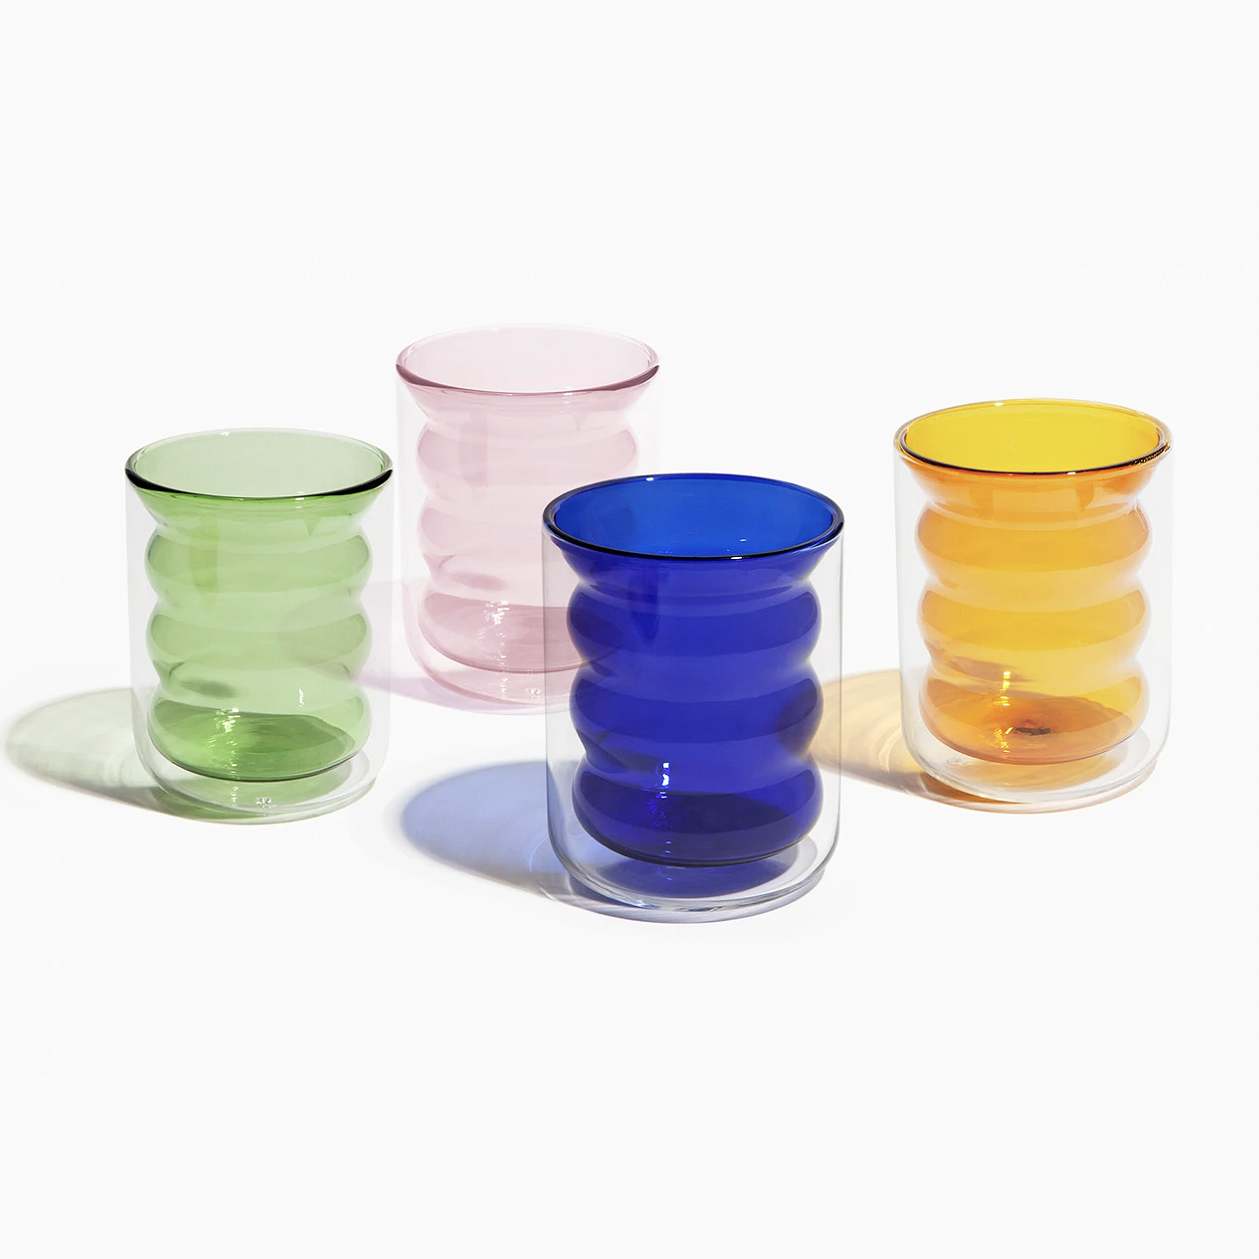 Sophie Lou Jacobsen Ripple Cup, 5 Colors, Set of 2 or Mixed Set on Food52